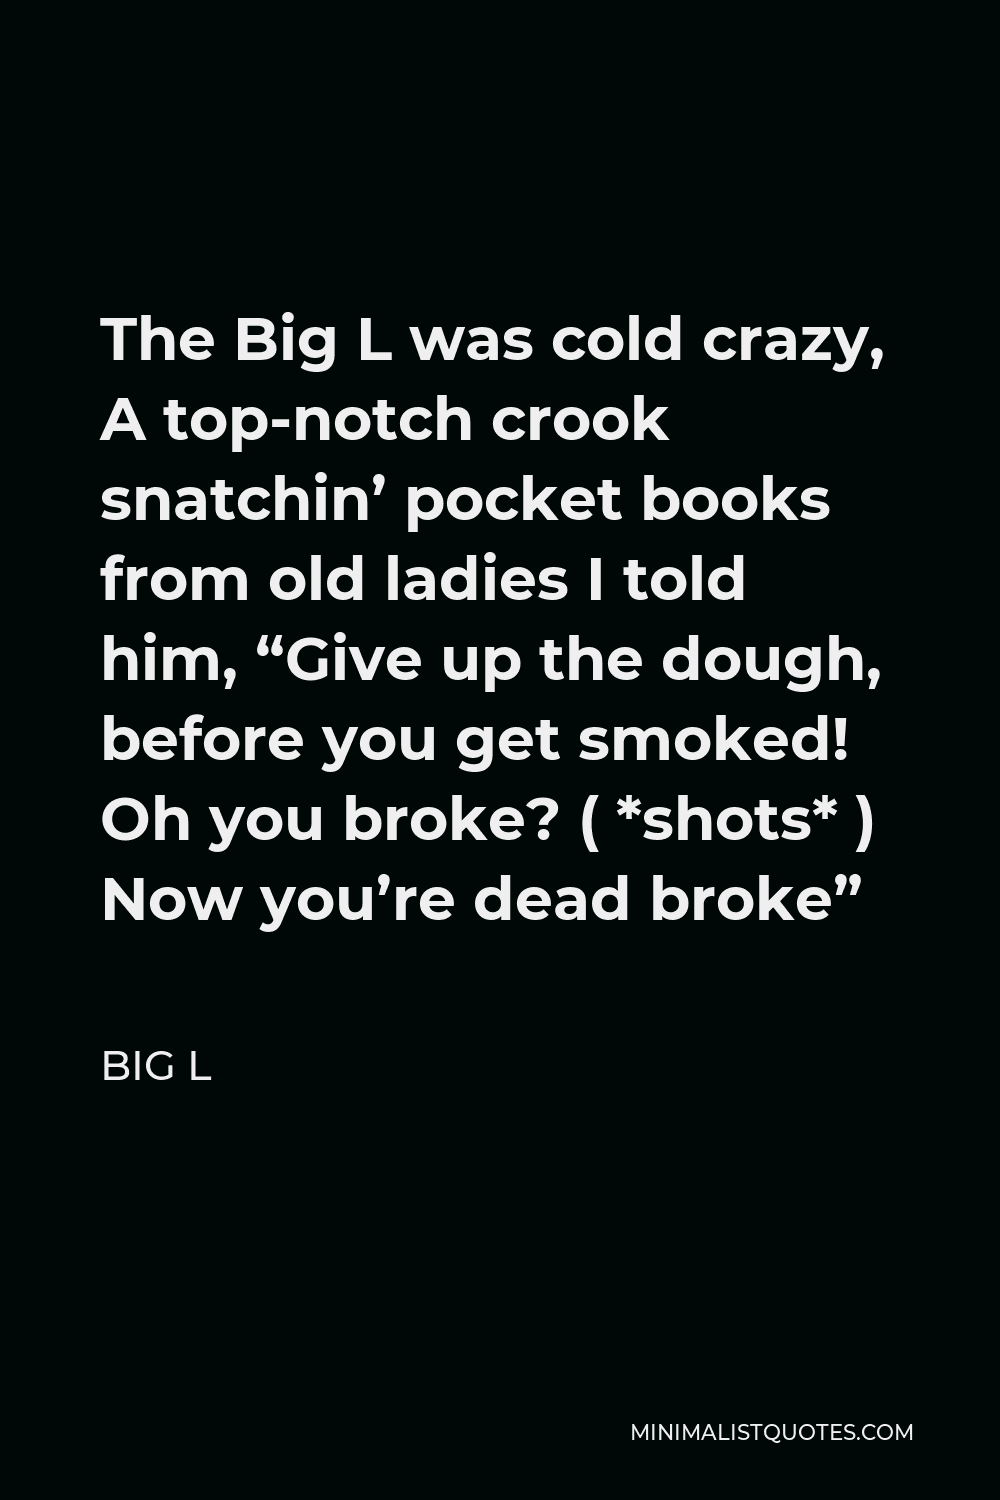 Big L Quote - The Big L was cold crazy, A top-notch crook snatchin’ pocket books from old ladies I told him, “Give up the dough, before you get smoked! Oh you broke? ( *shots* ) Now you’re dead broke”